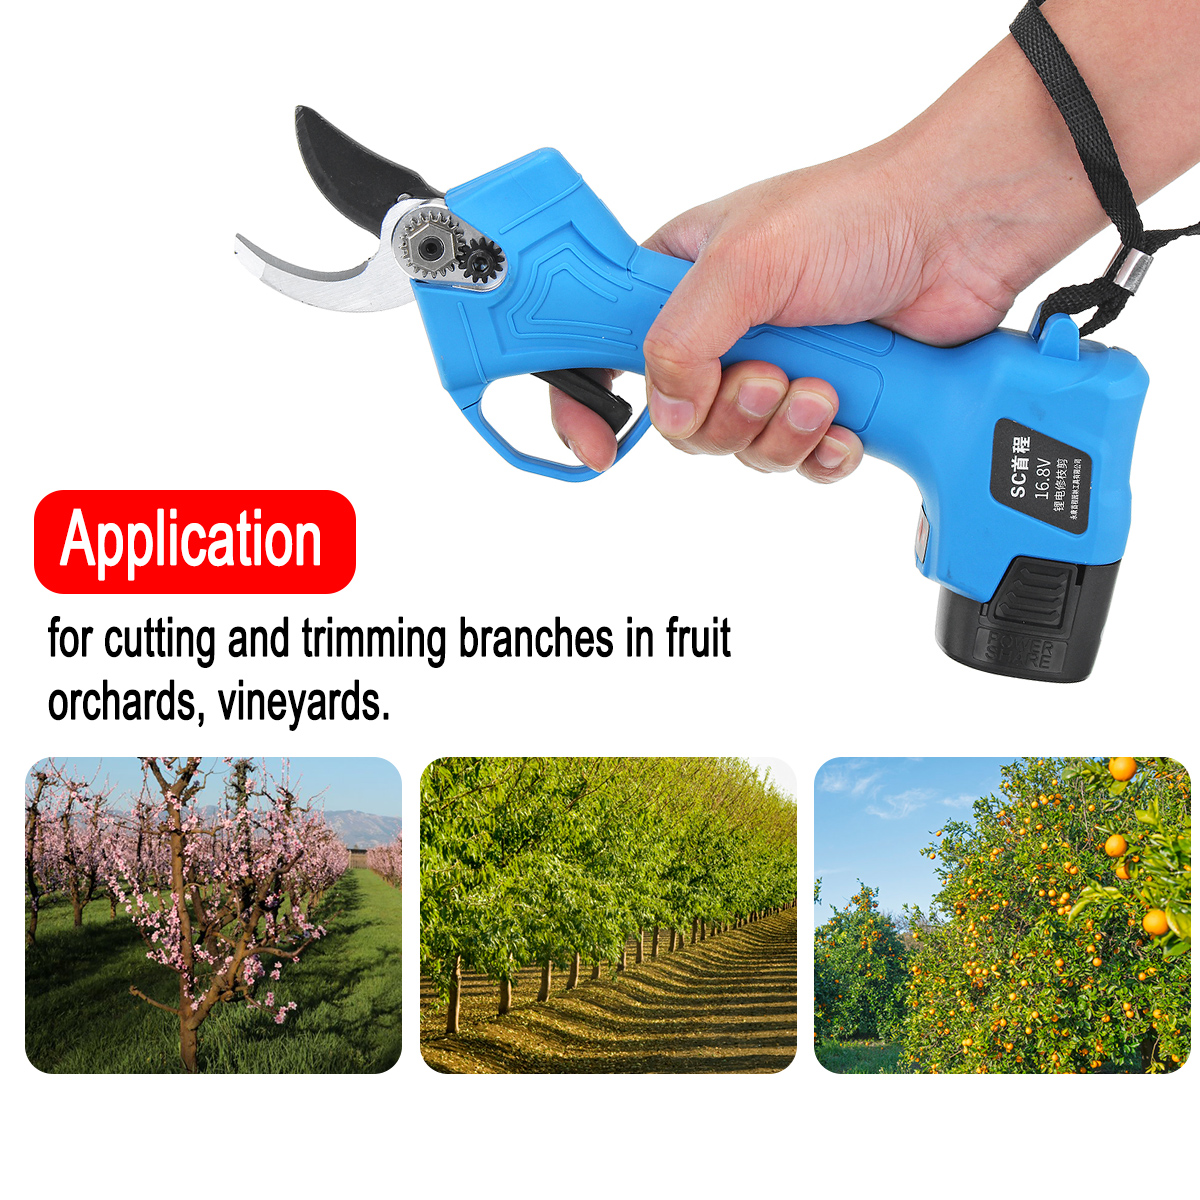 168V-Wireless-25mm-Rechargeable-Electric-Pruning-Shears-Scissors-Branch-Tree-Cutting-Trimming-Tools-1656246-4